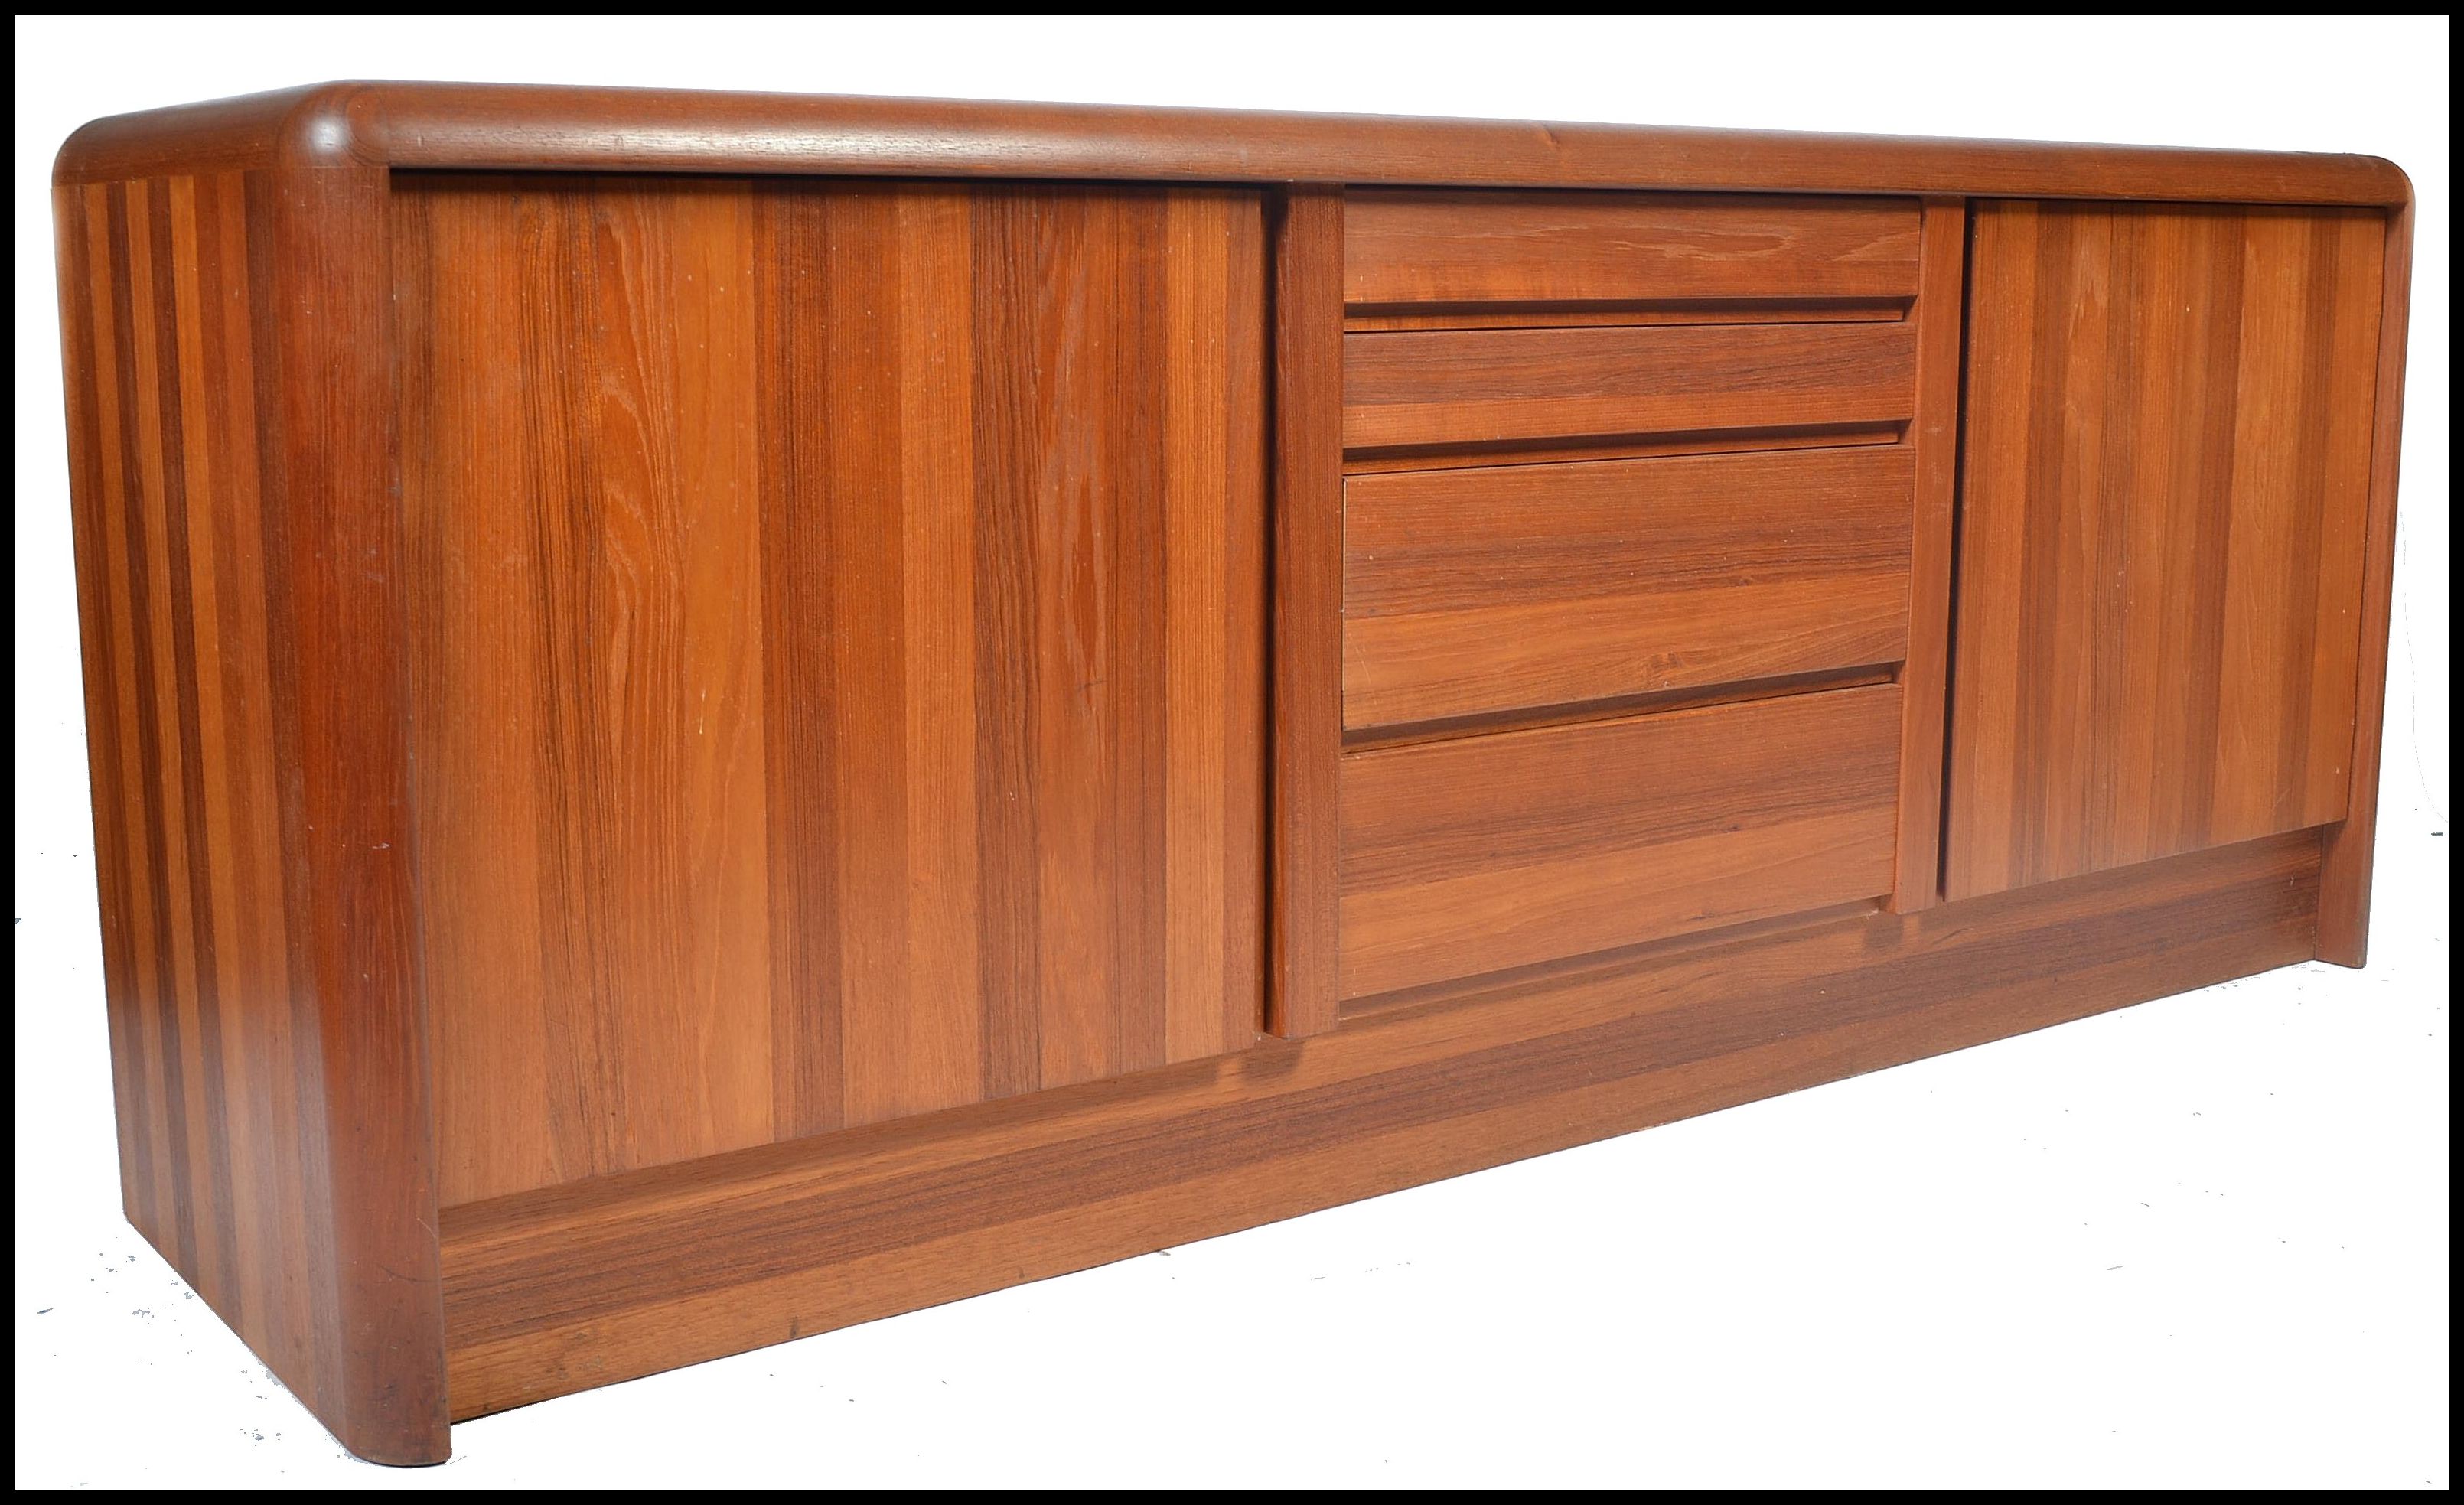 A 20th century Danish sideboard of low form and heavy solid teak construction by Ejvind Johansen